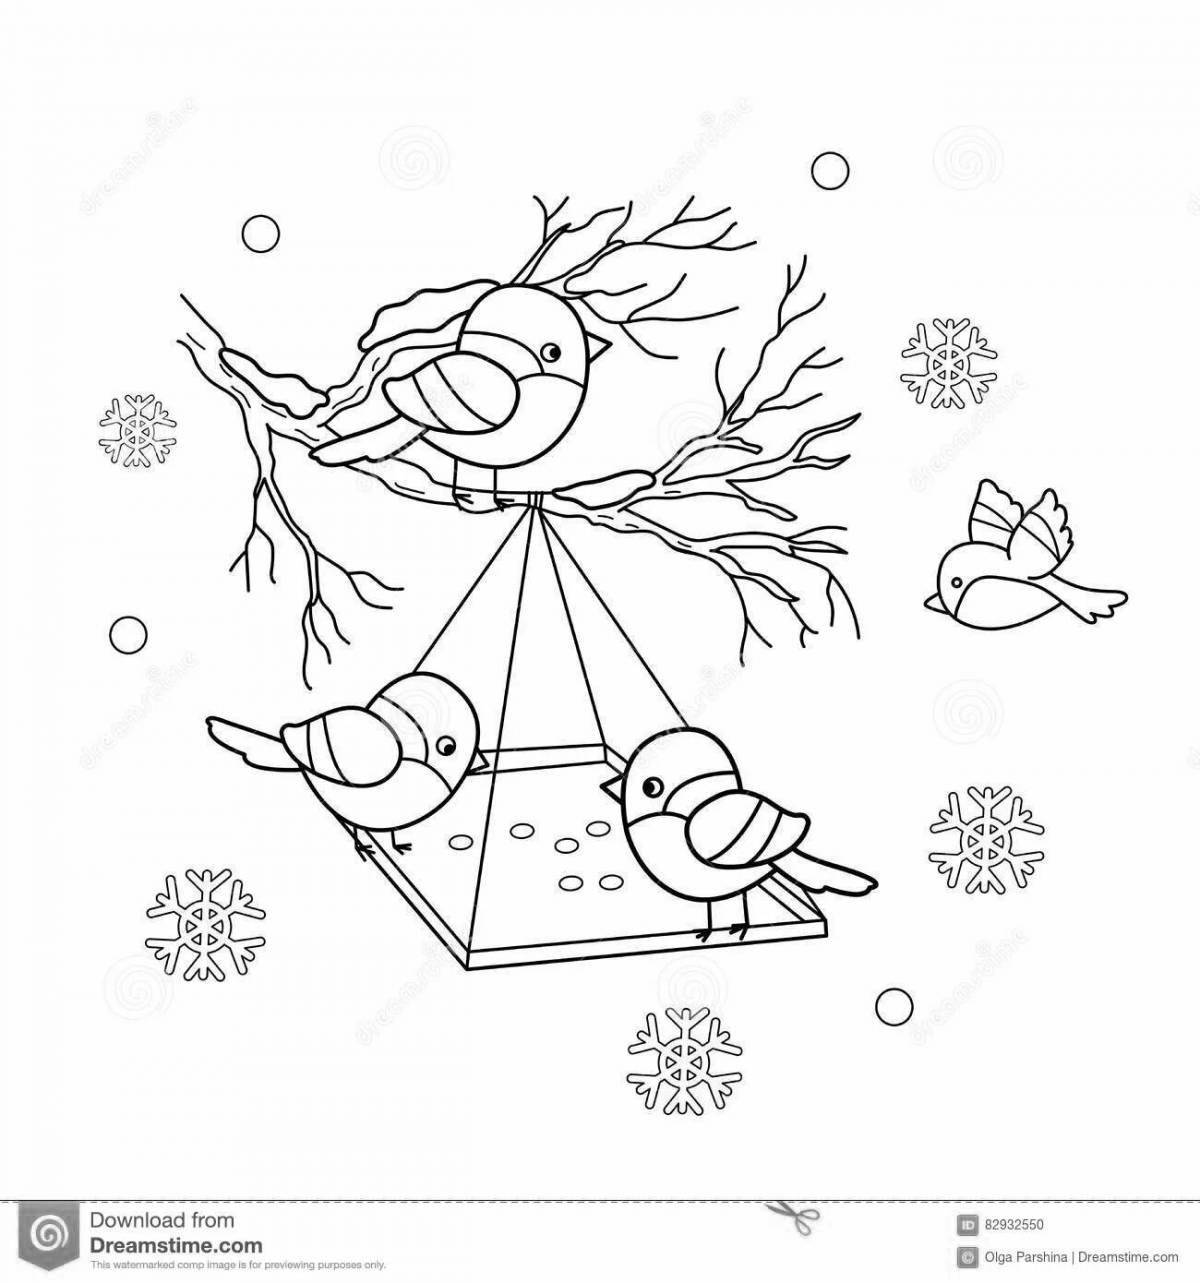 Fabulous winter birds coloring for children 6-7 years old